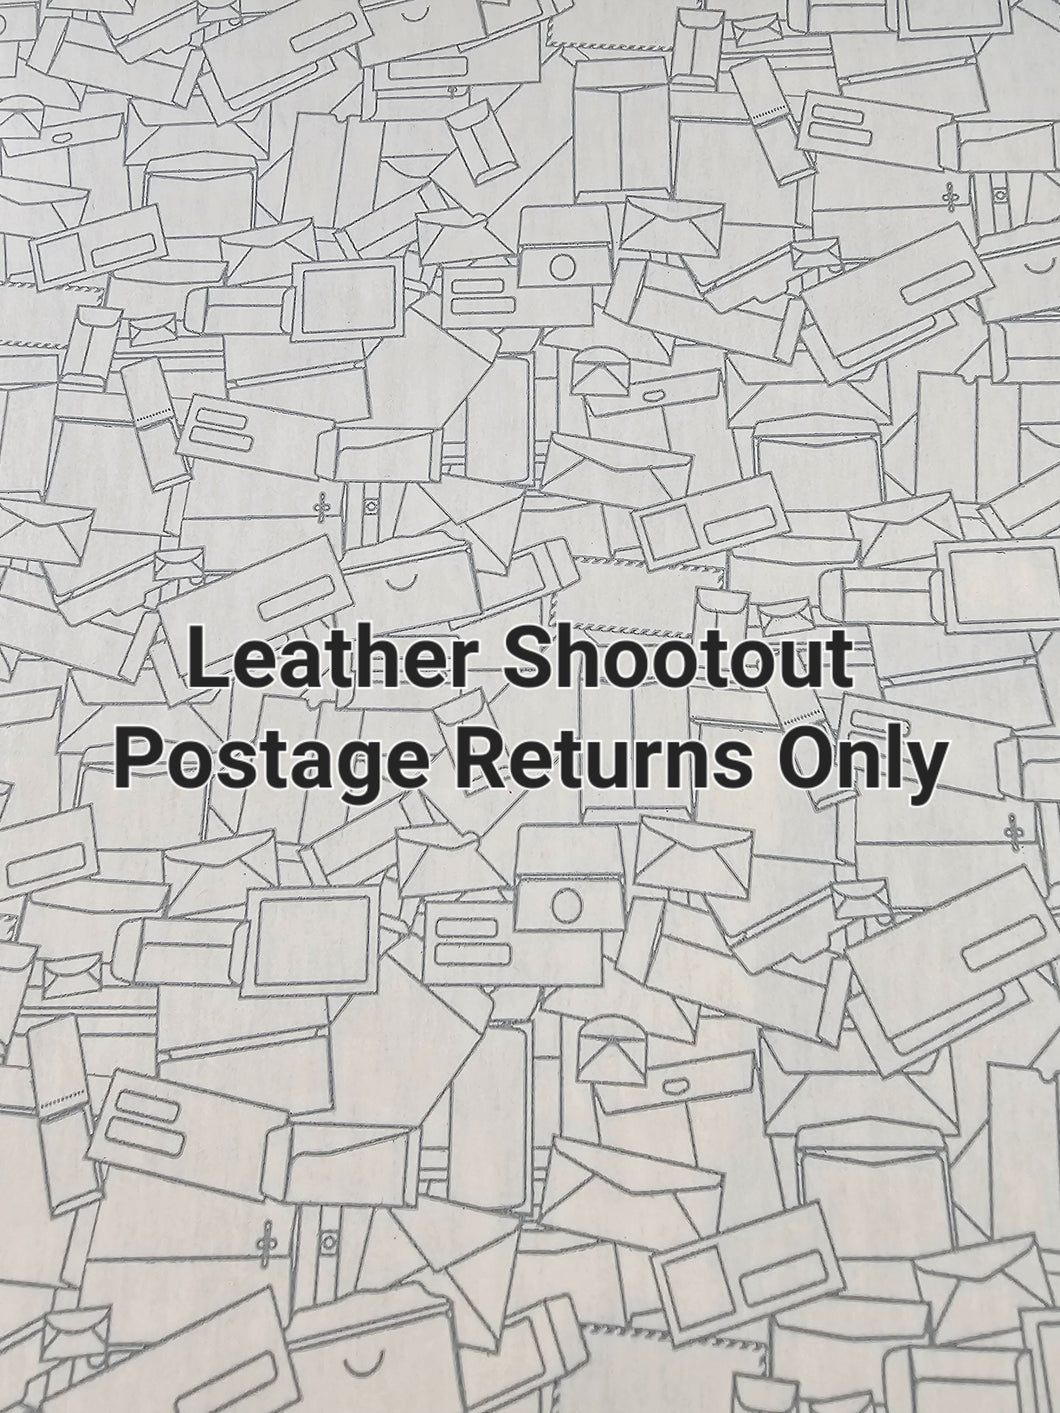 Last Minute Leather Shootout Returns Only